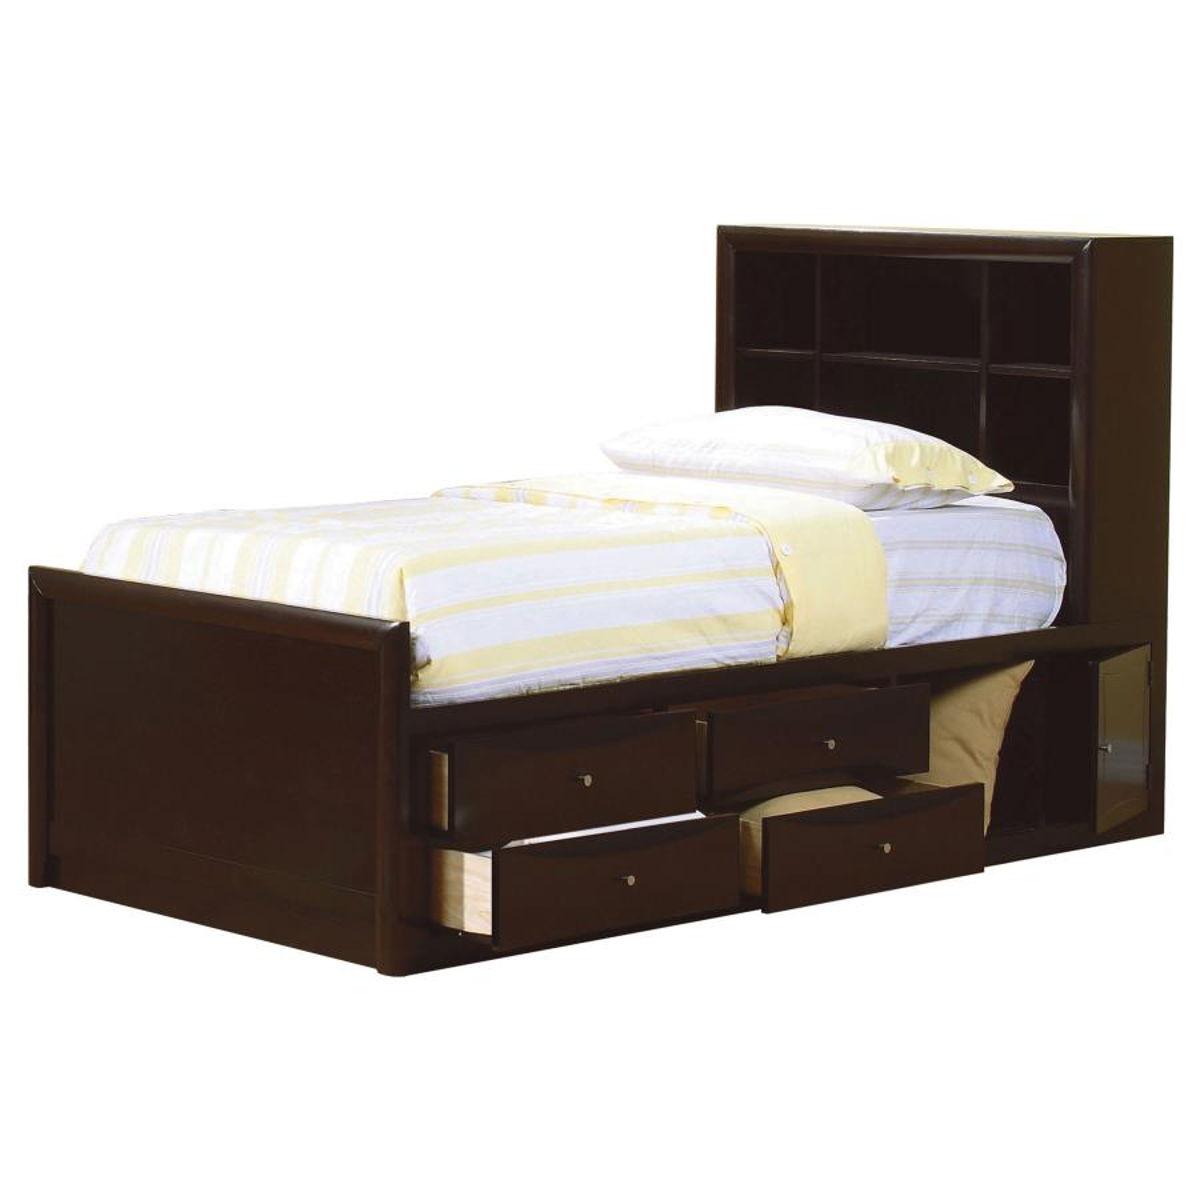 CoasterEssence - Phoenix - Bookcase Bed with Underbed Storage - 5th Avenue Furniture